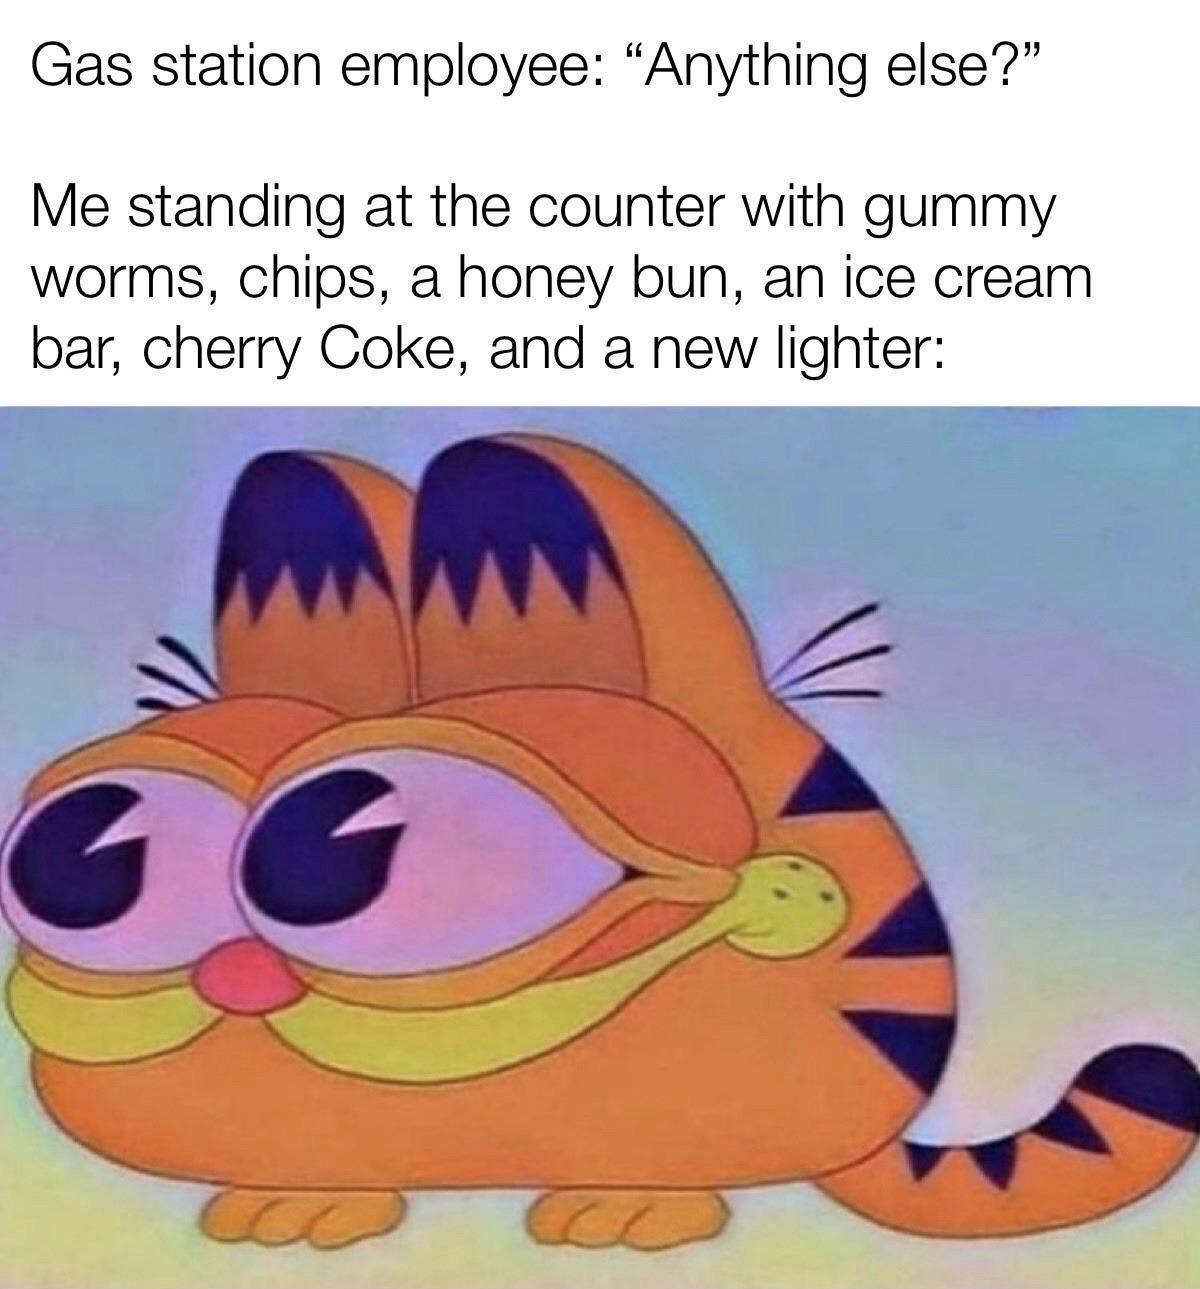 funny memes and pics - i m shy at first meme - Gas station employee "Anything else?" Me standing at the counter with gummy worms, chips, a honey bun, an ice cream bar, cherry Coke, and a new lighter